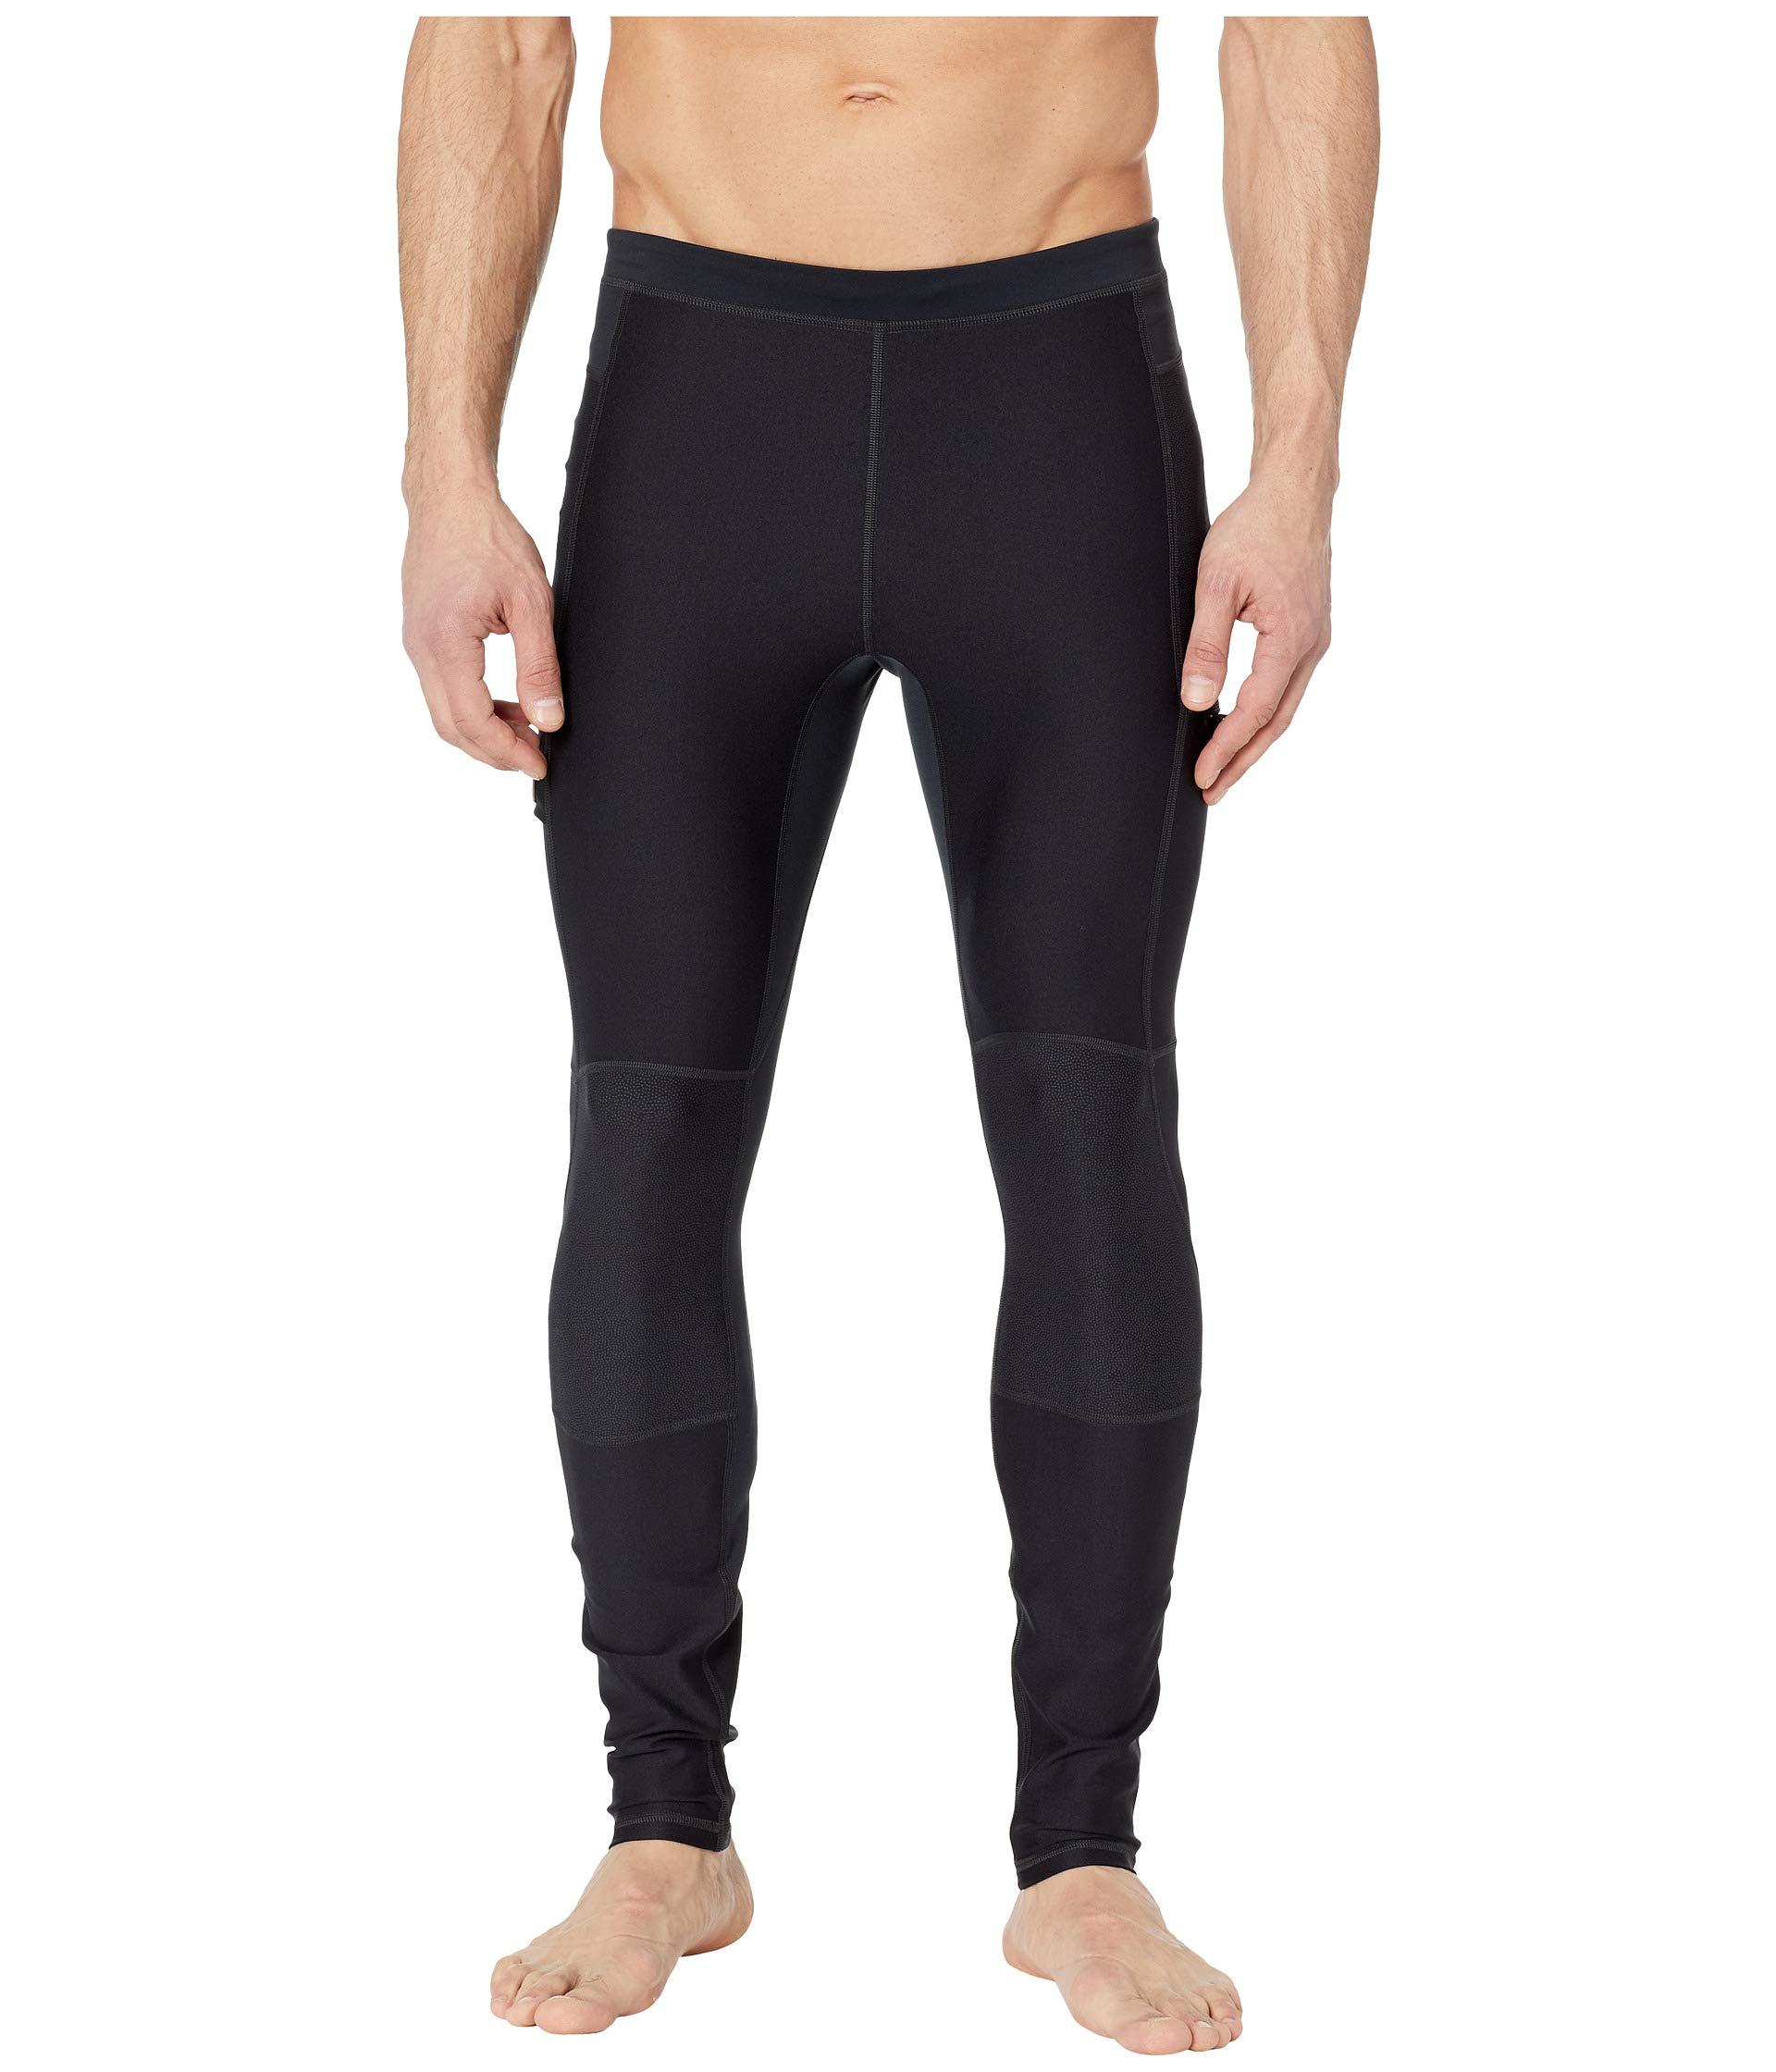 Fjallraven Synthetic Abisko Trail Tights in Black for Men - Lyst